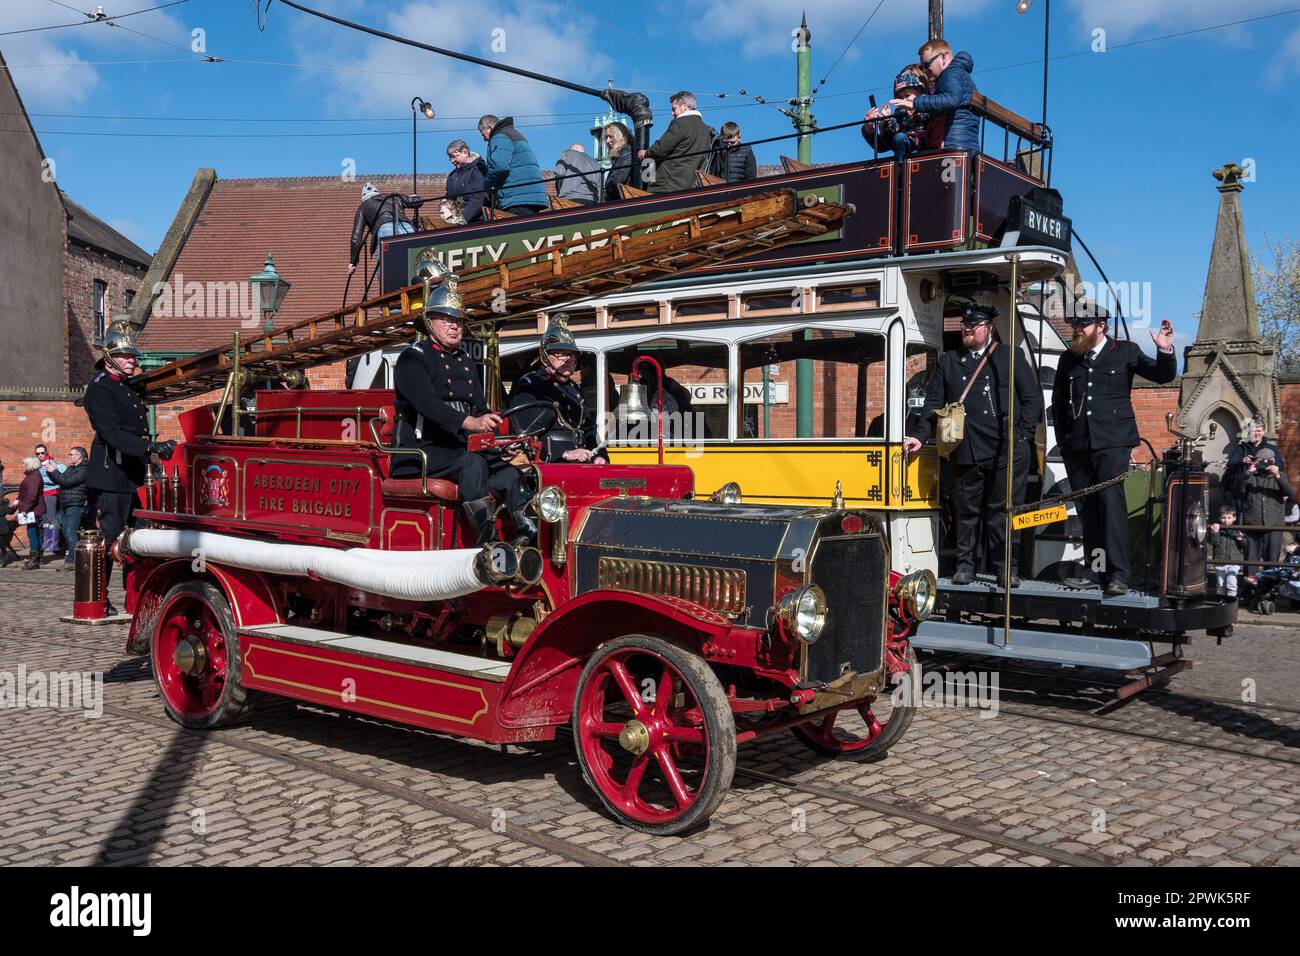 A vintage fire engine passes an equally vintage double decker tram car. Pictured at Beamish Living Museum, North East England. Stock Photo